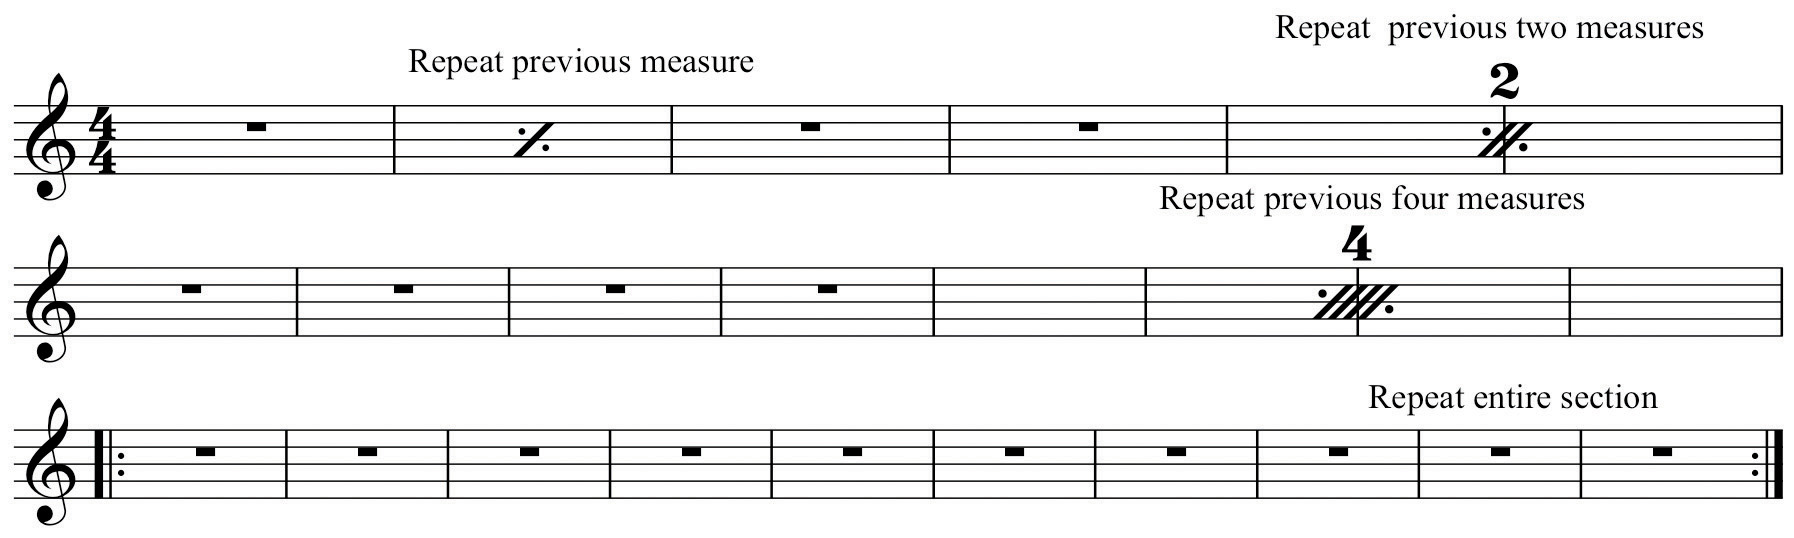 Music Notation Practices